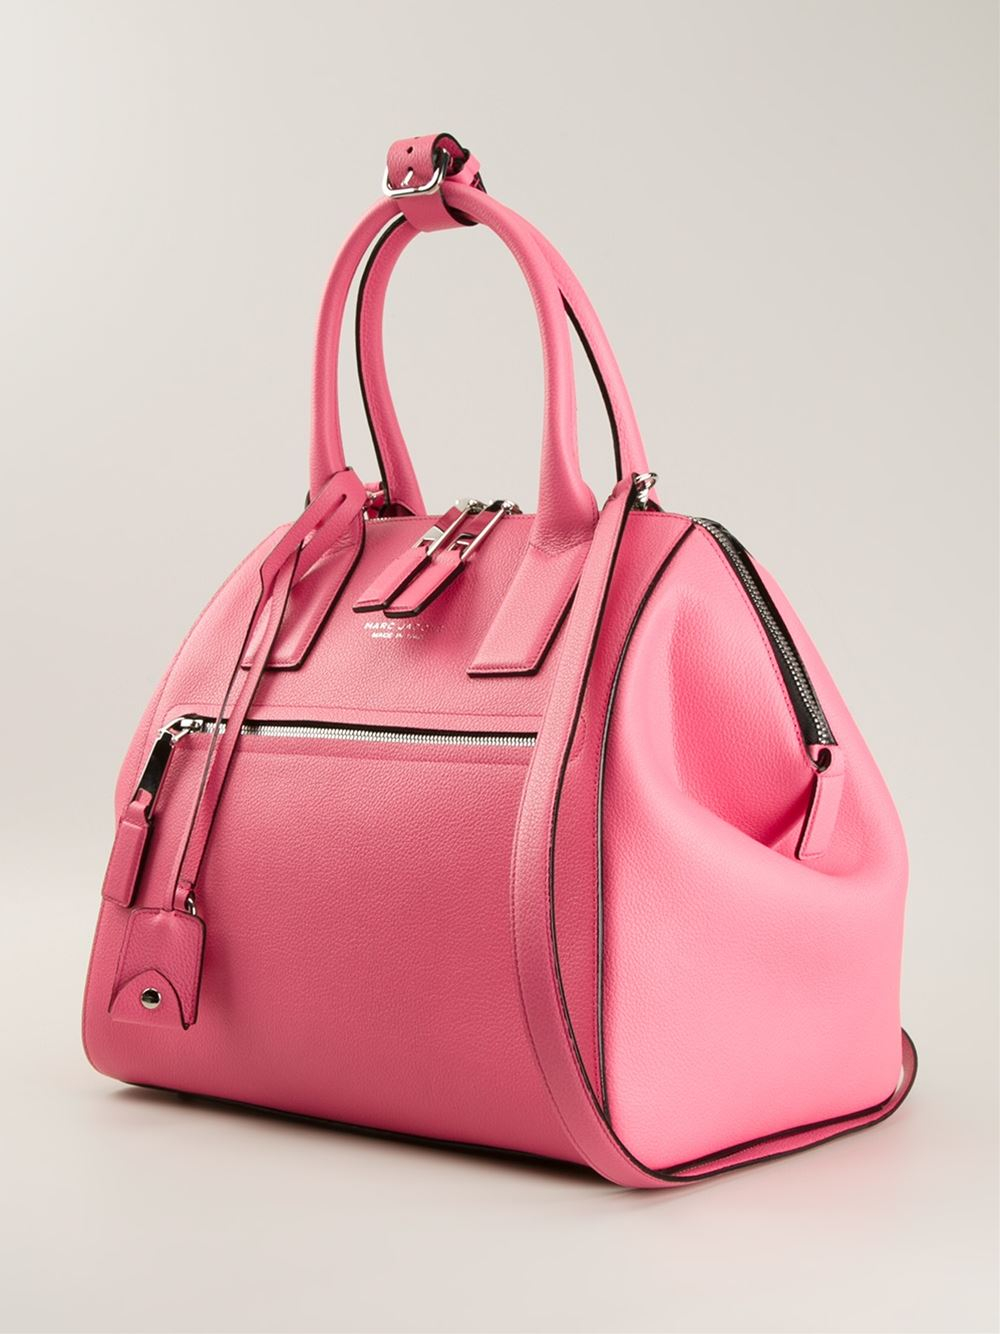 Marc Jacobs Large 'incognito' Tote Bag in Pink & Purple (Pink) - Lyst